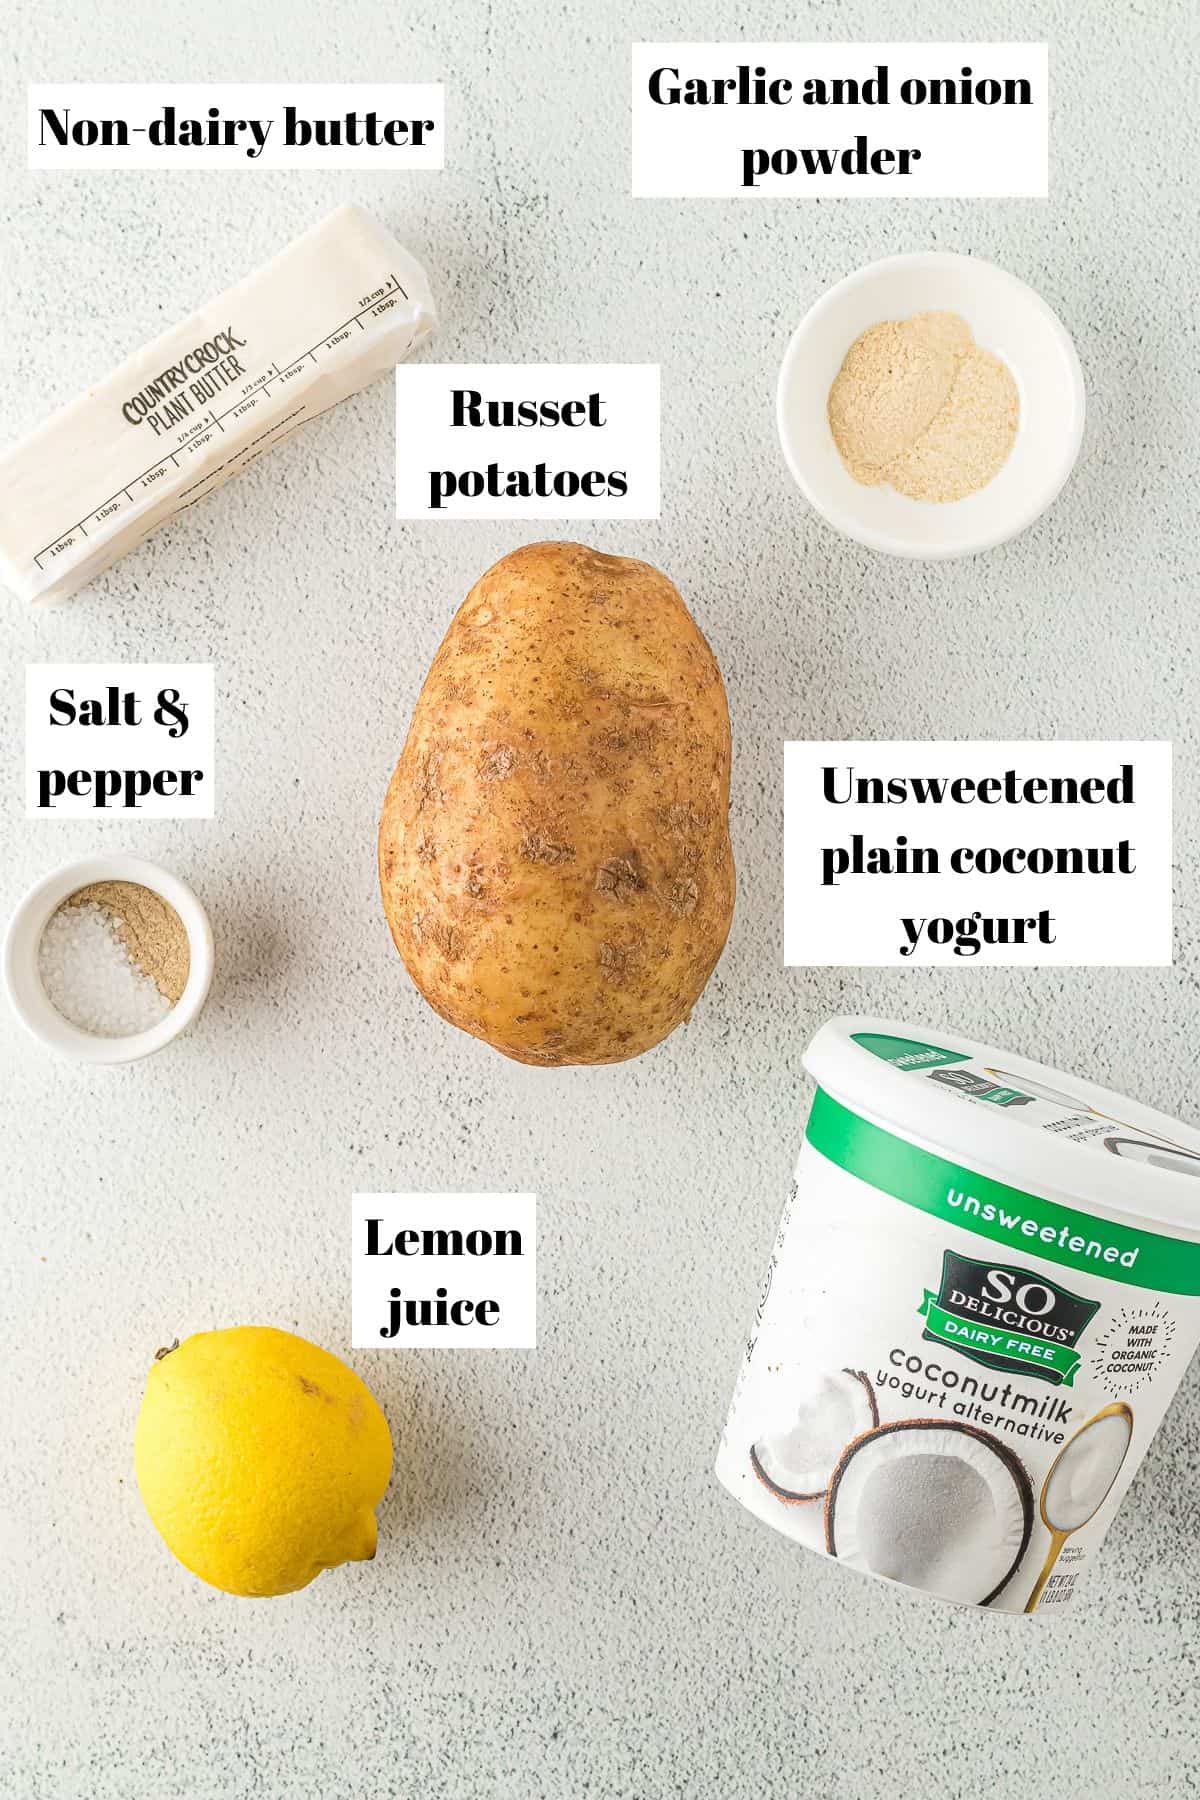 Ingredients to make dairy-free mashed potatoes. Image has text for labeling ingredients.